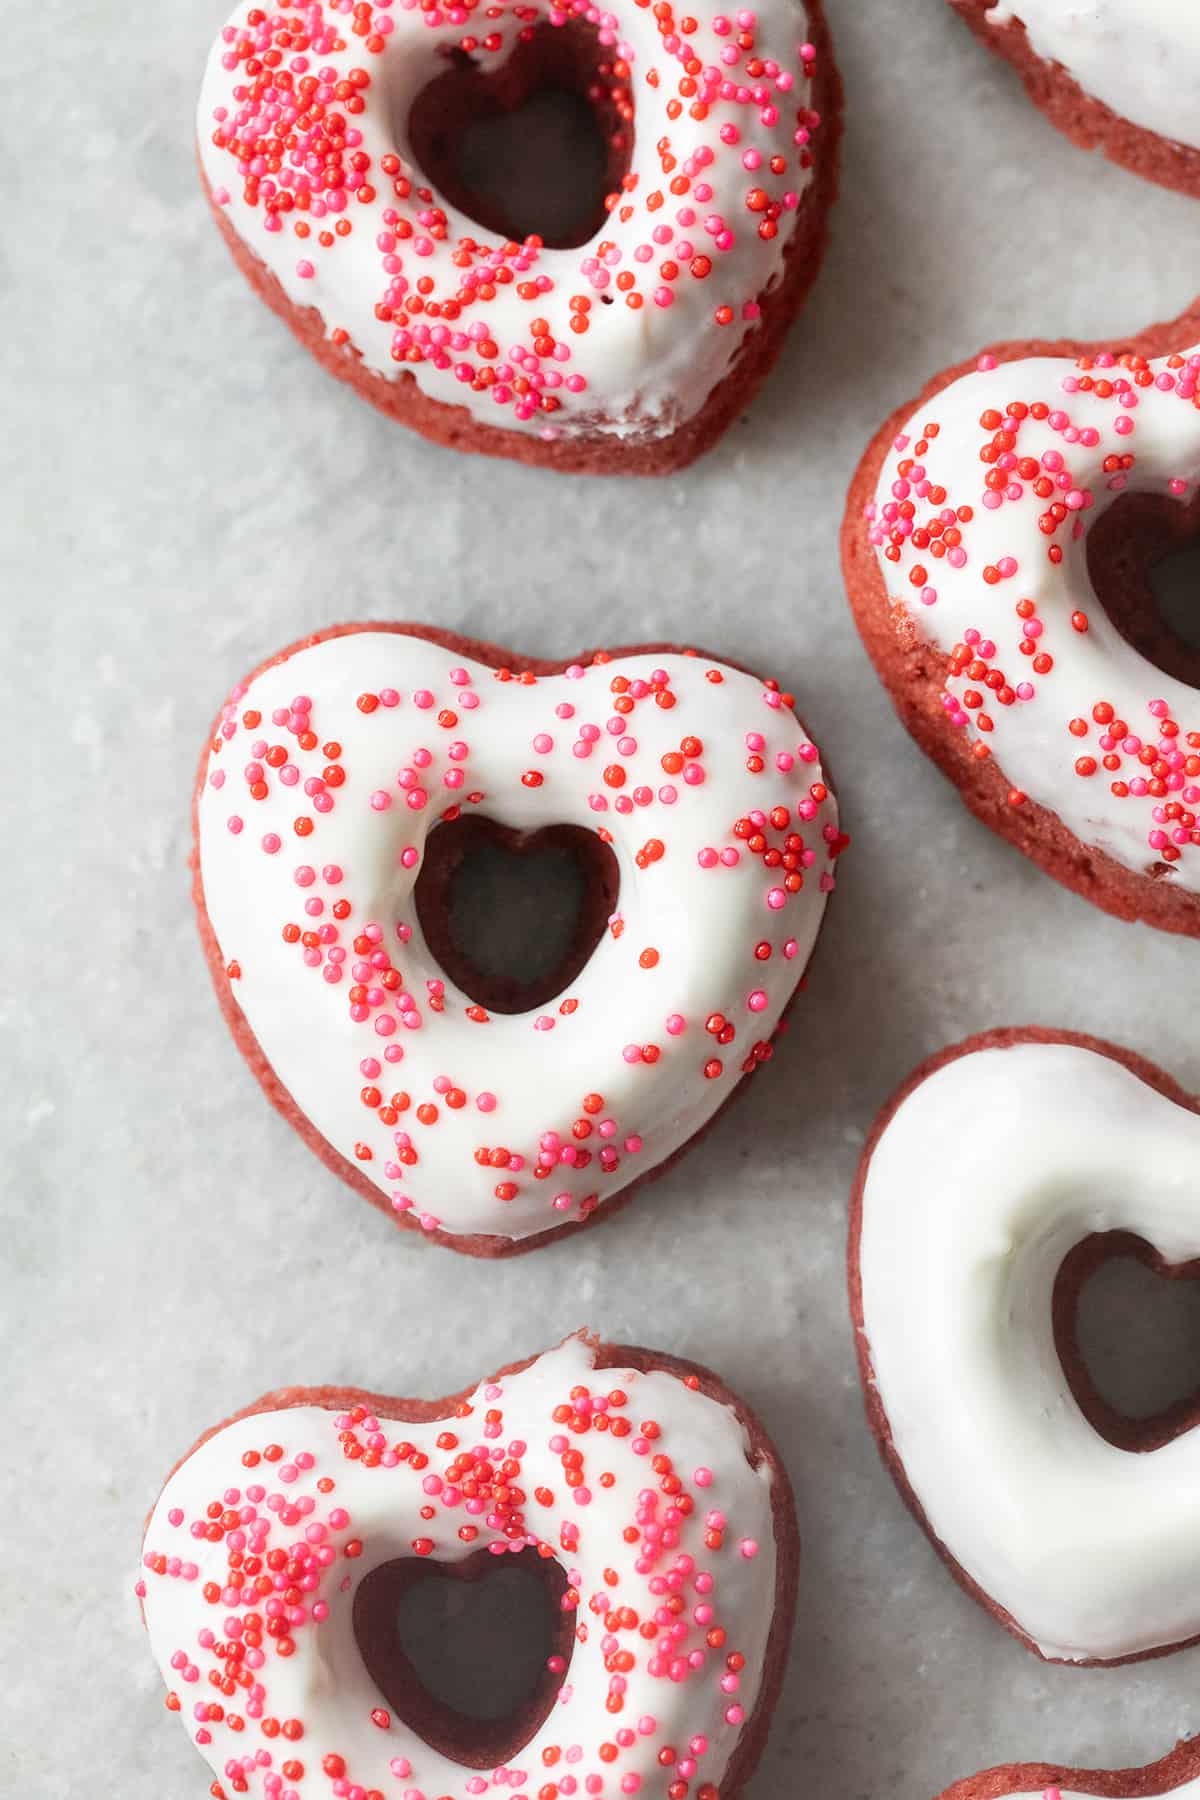 Heart-shaped baked red velvet donut with cream cheese glaze and sprinkles.